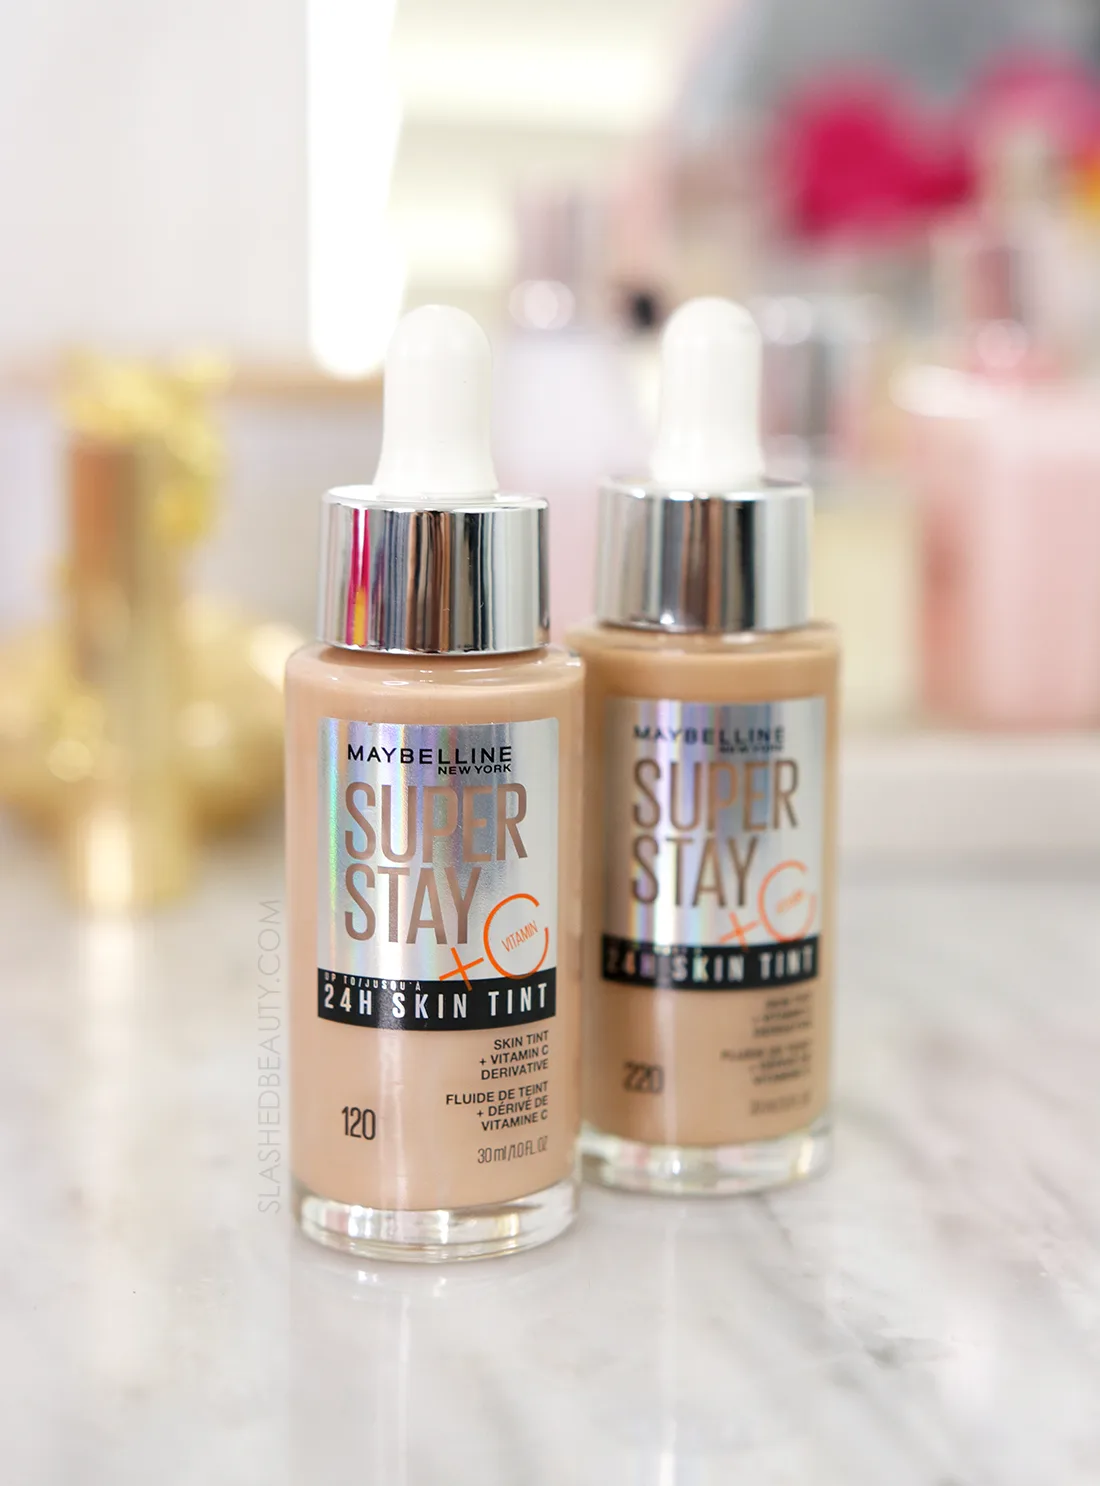 Two bottles of Maybelline SuperStay 24H Skin Tint + Vitamin C sitting on a marble vanity | Maybelline SuperStay 24H Skin Tint Review | Slashed Beauty